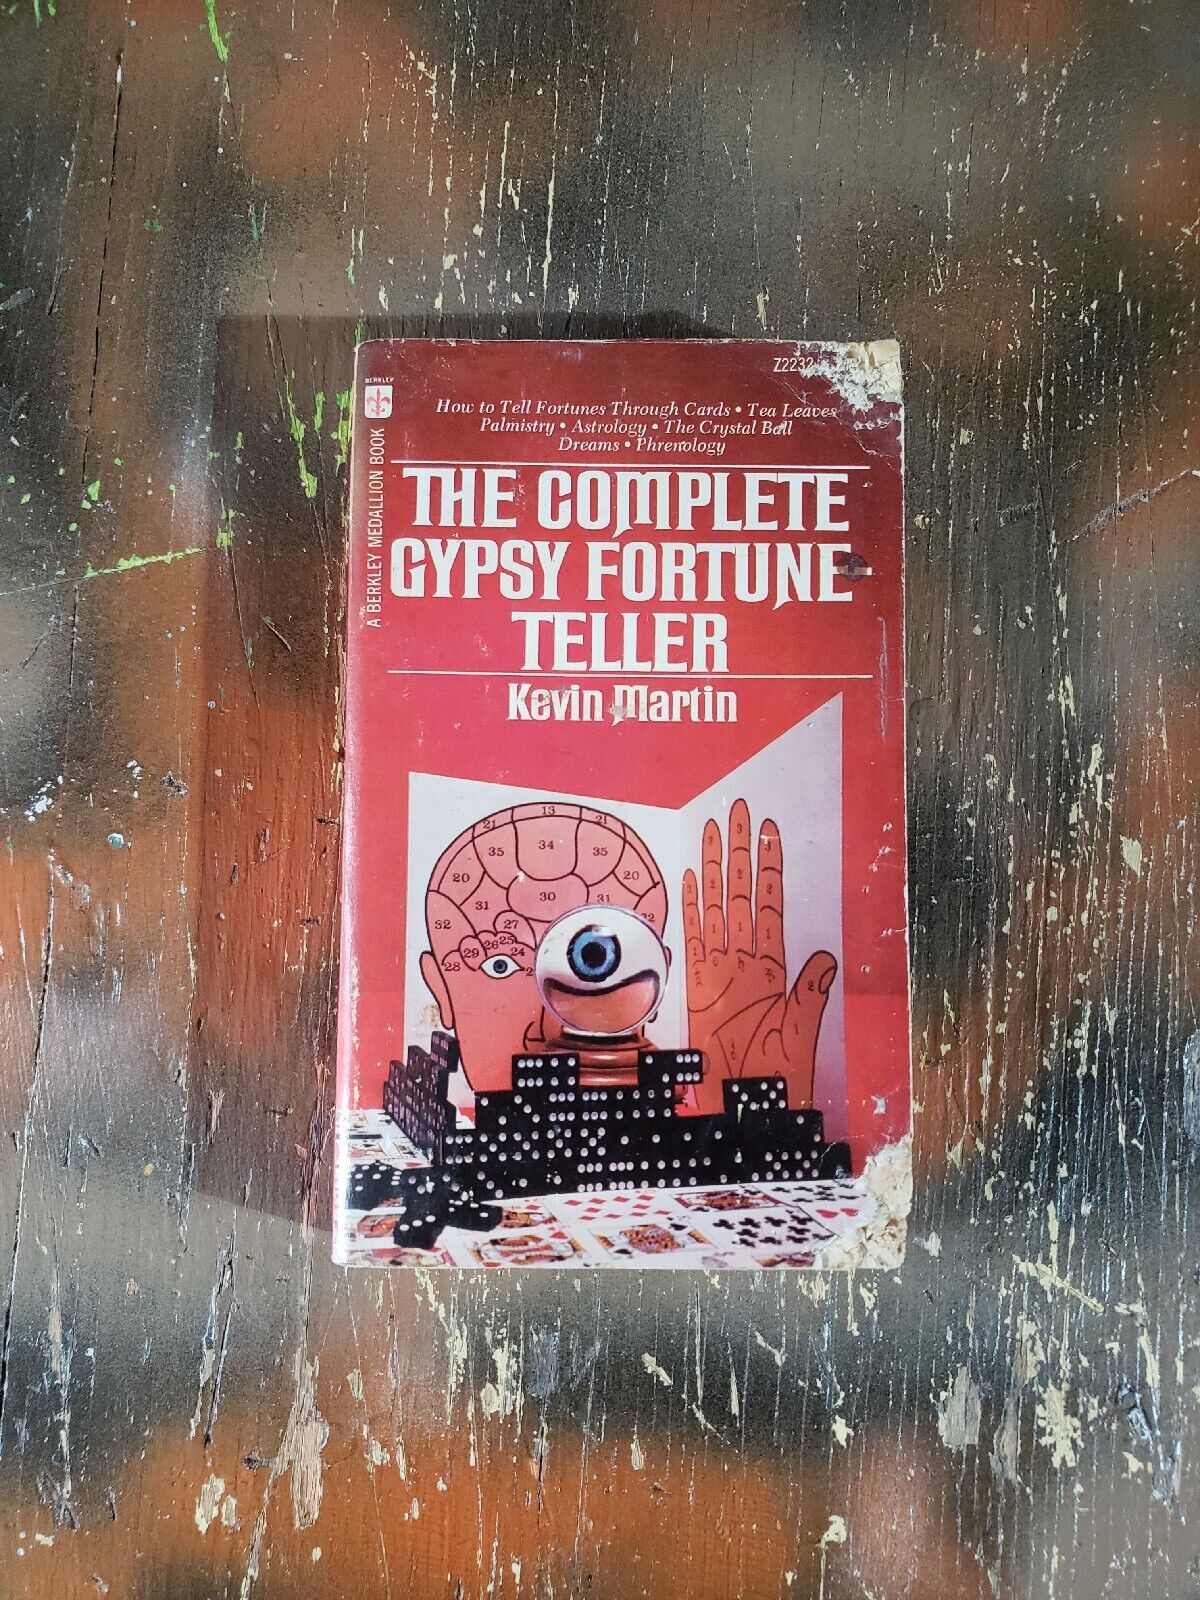 The Complete Gypsy Fortune Teller by: Kevin Martin, Berkley Medallion 1972